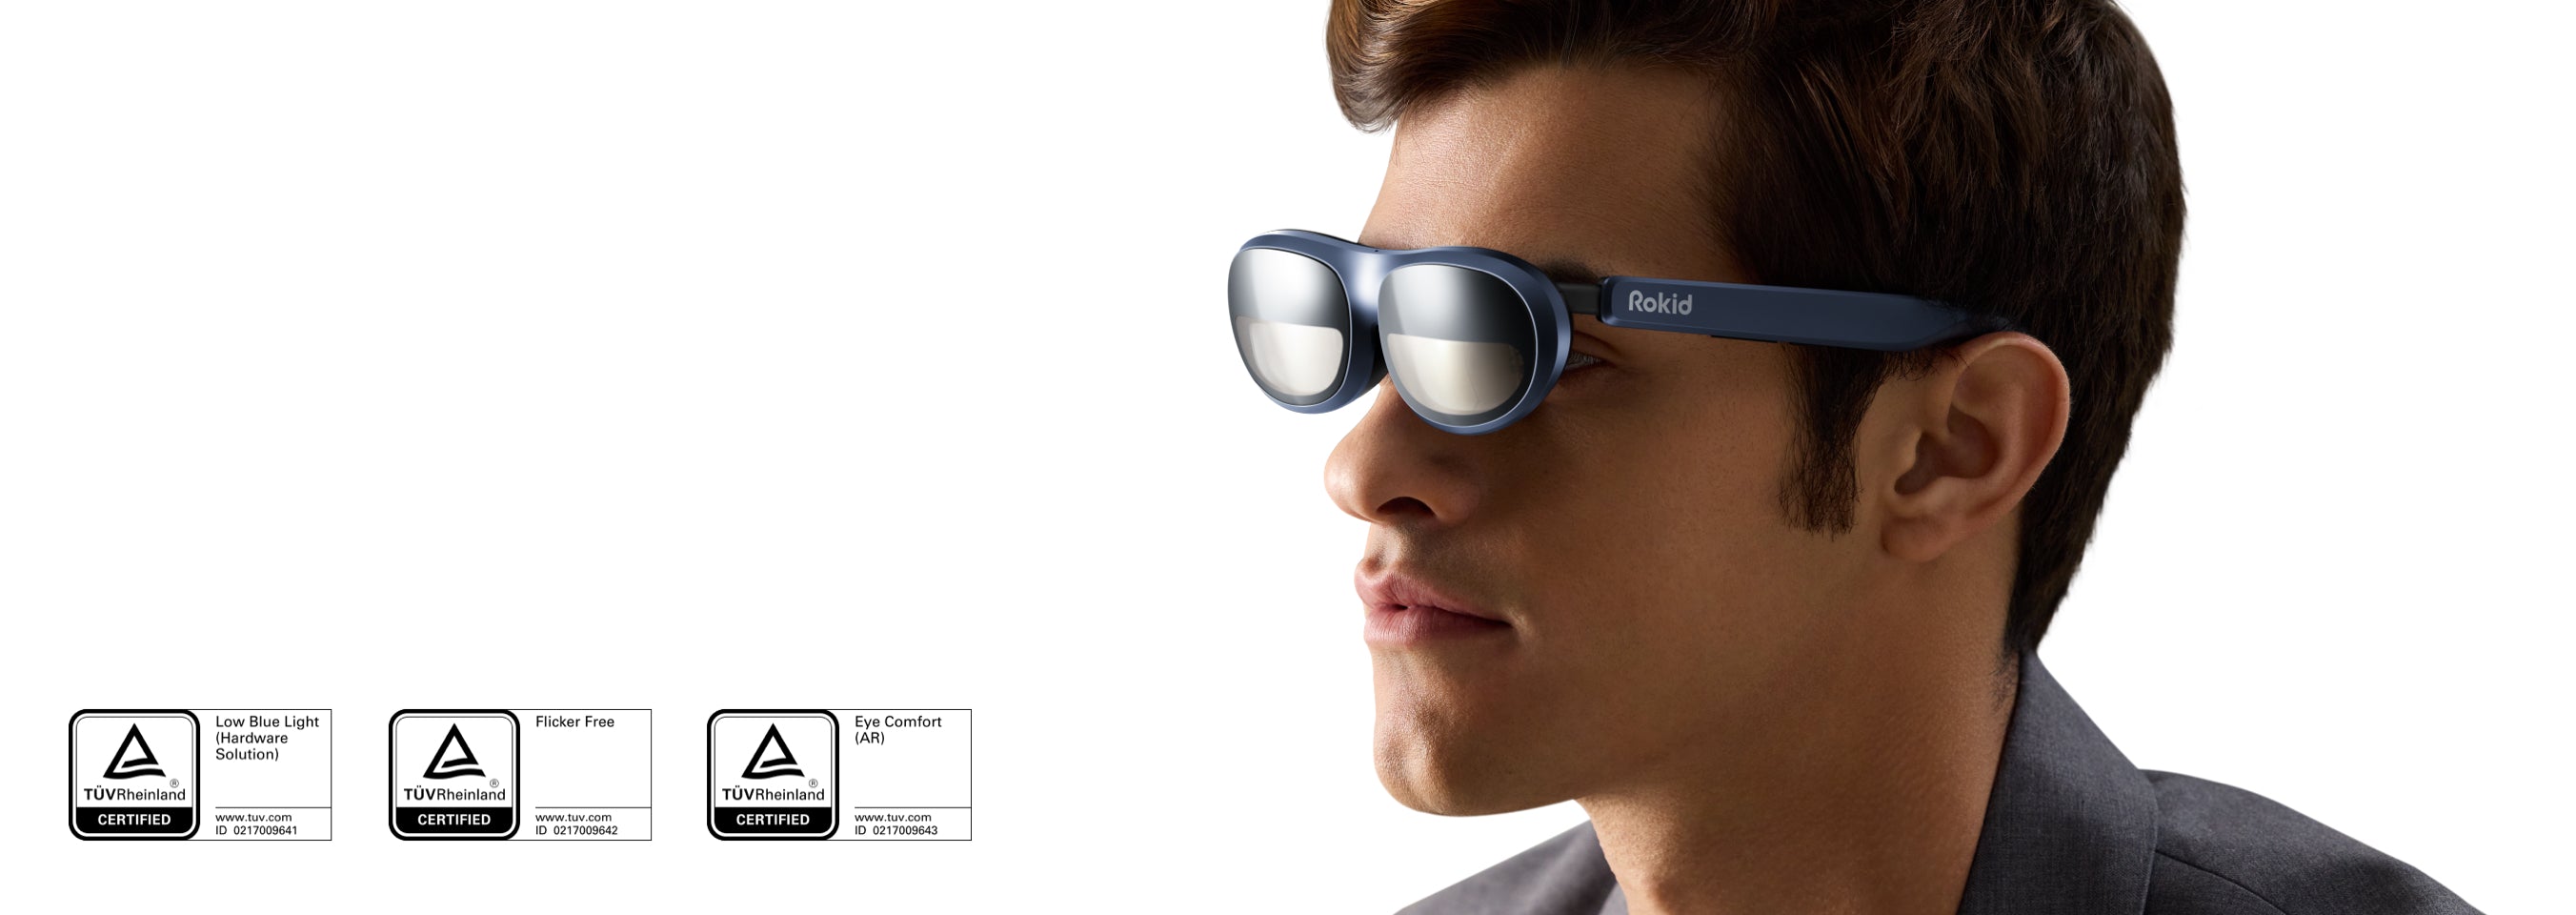 Rokid Max AR frames features low blue light, flicker free, and eye comfort certified